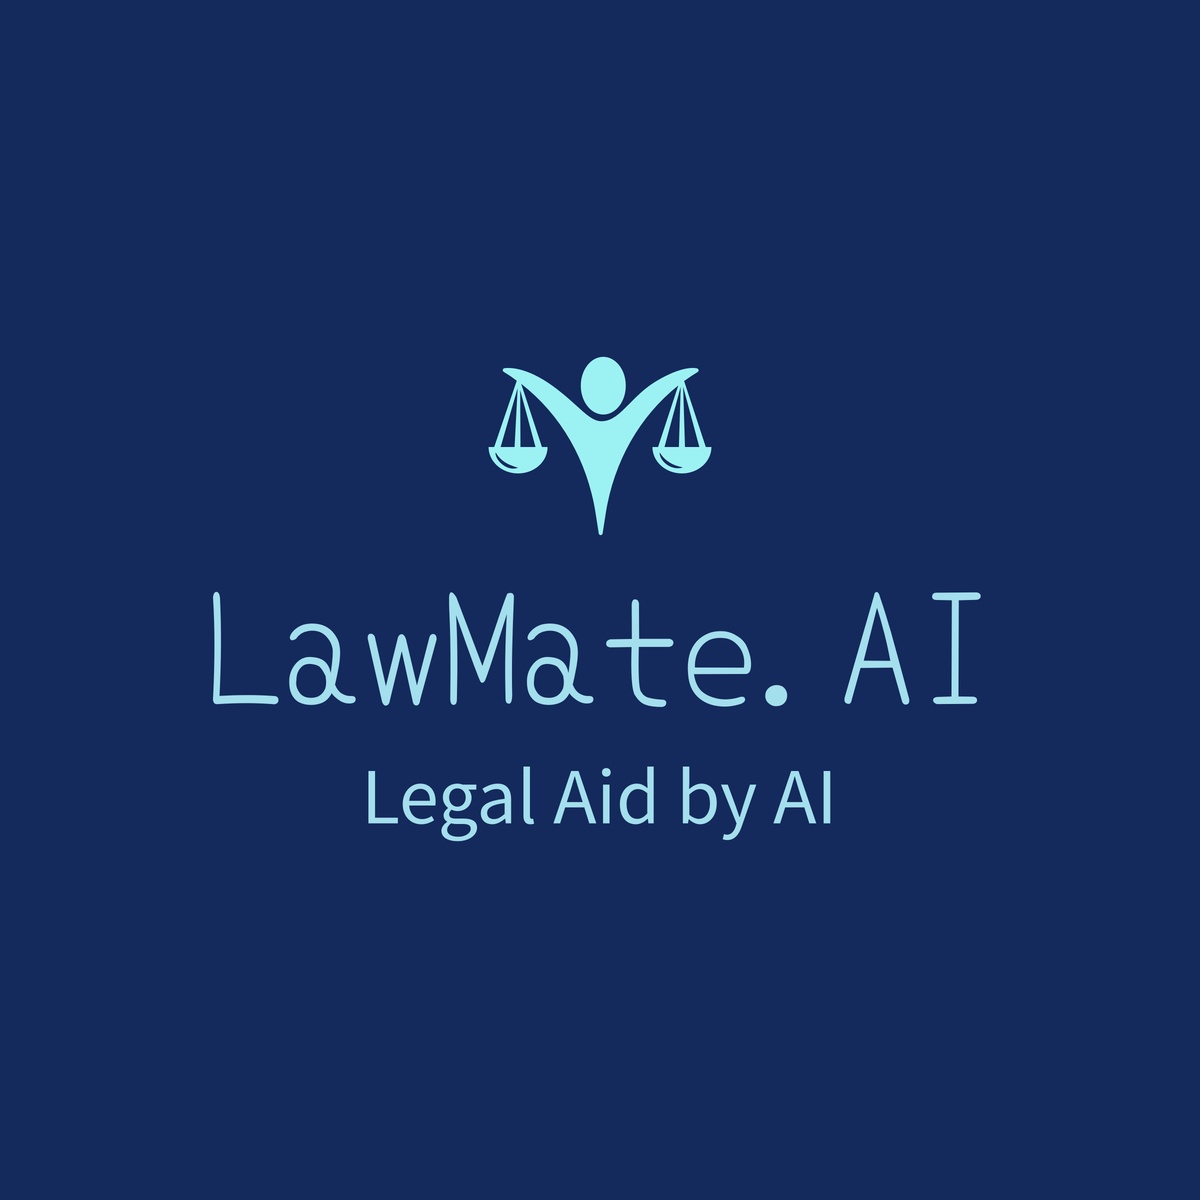 LawMate AI Set to Expand its Innovative Legal Aid Services with Mobile Application